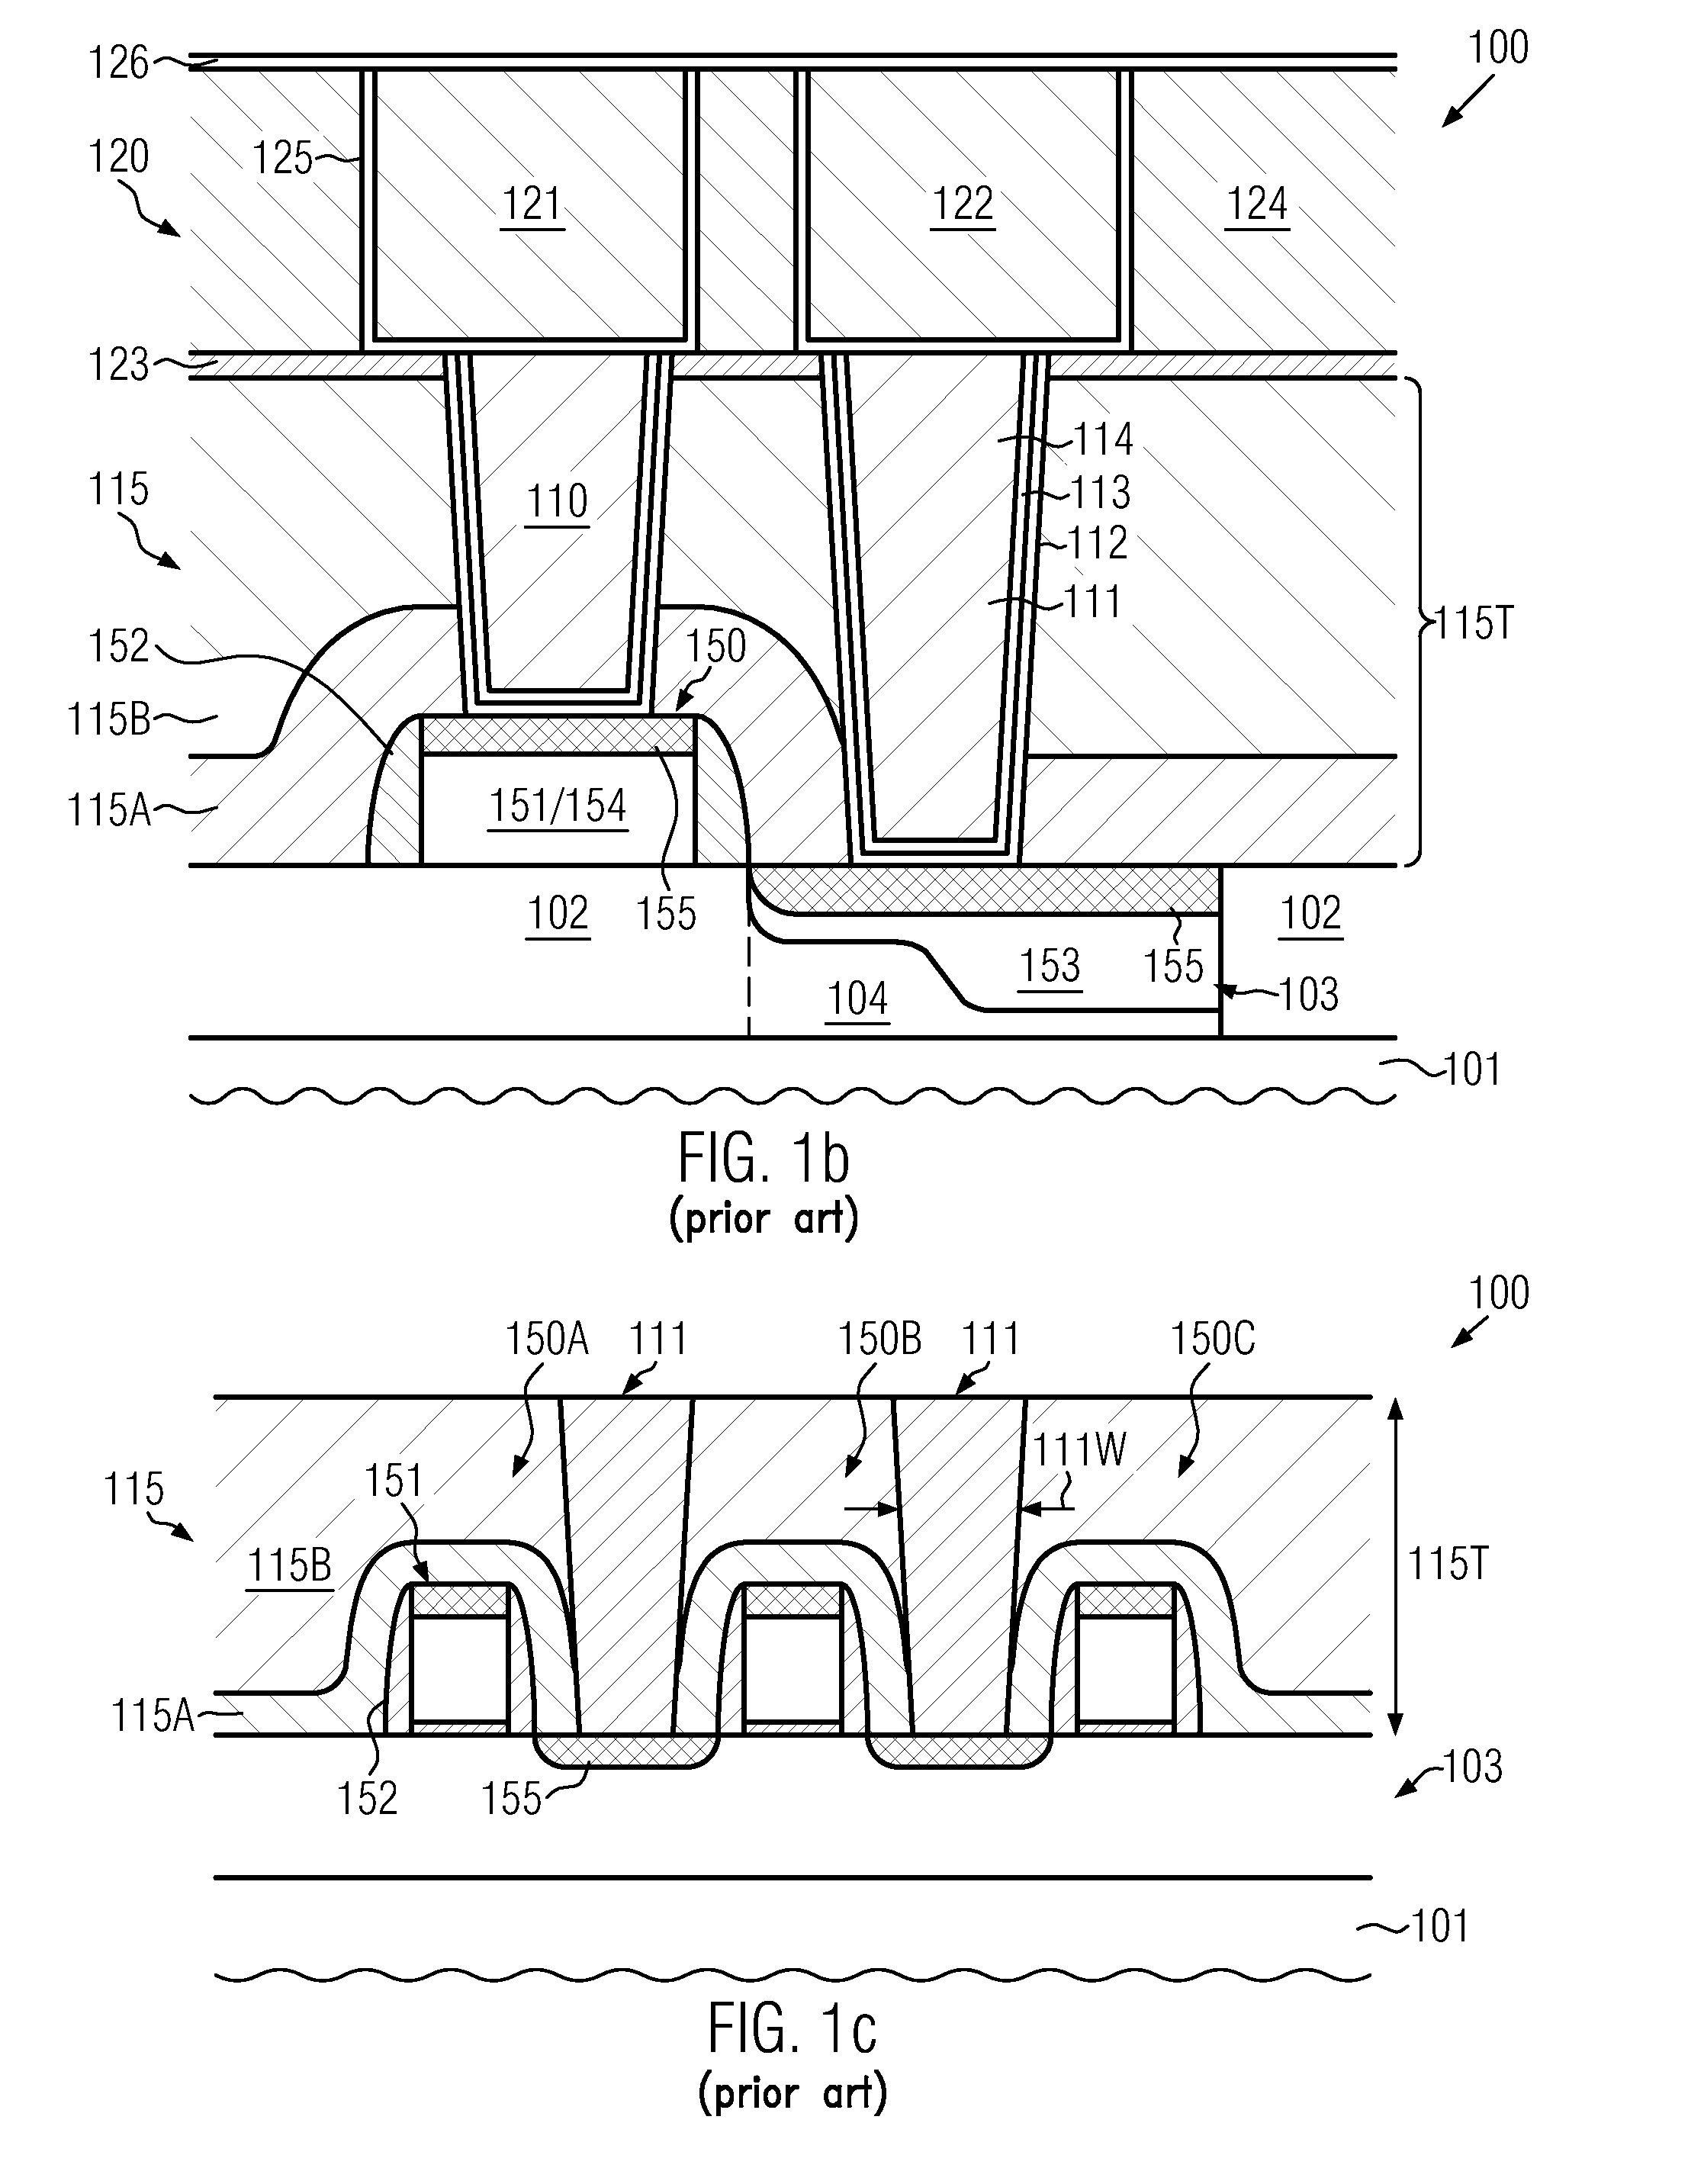 Hybrid contact structure with low aspect ratio contacts in a semiconductor device